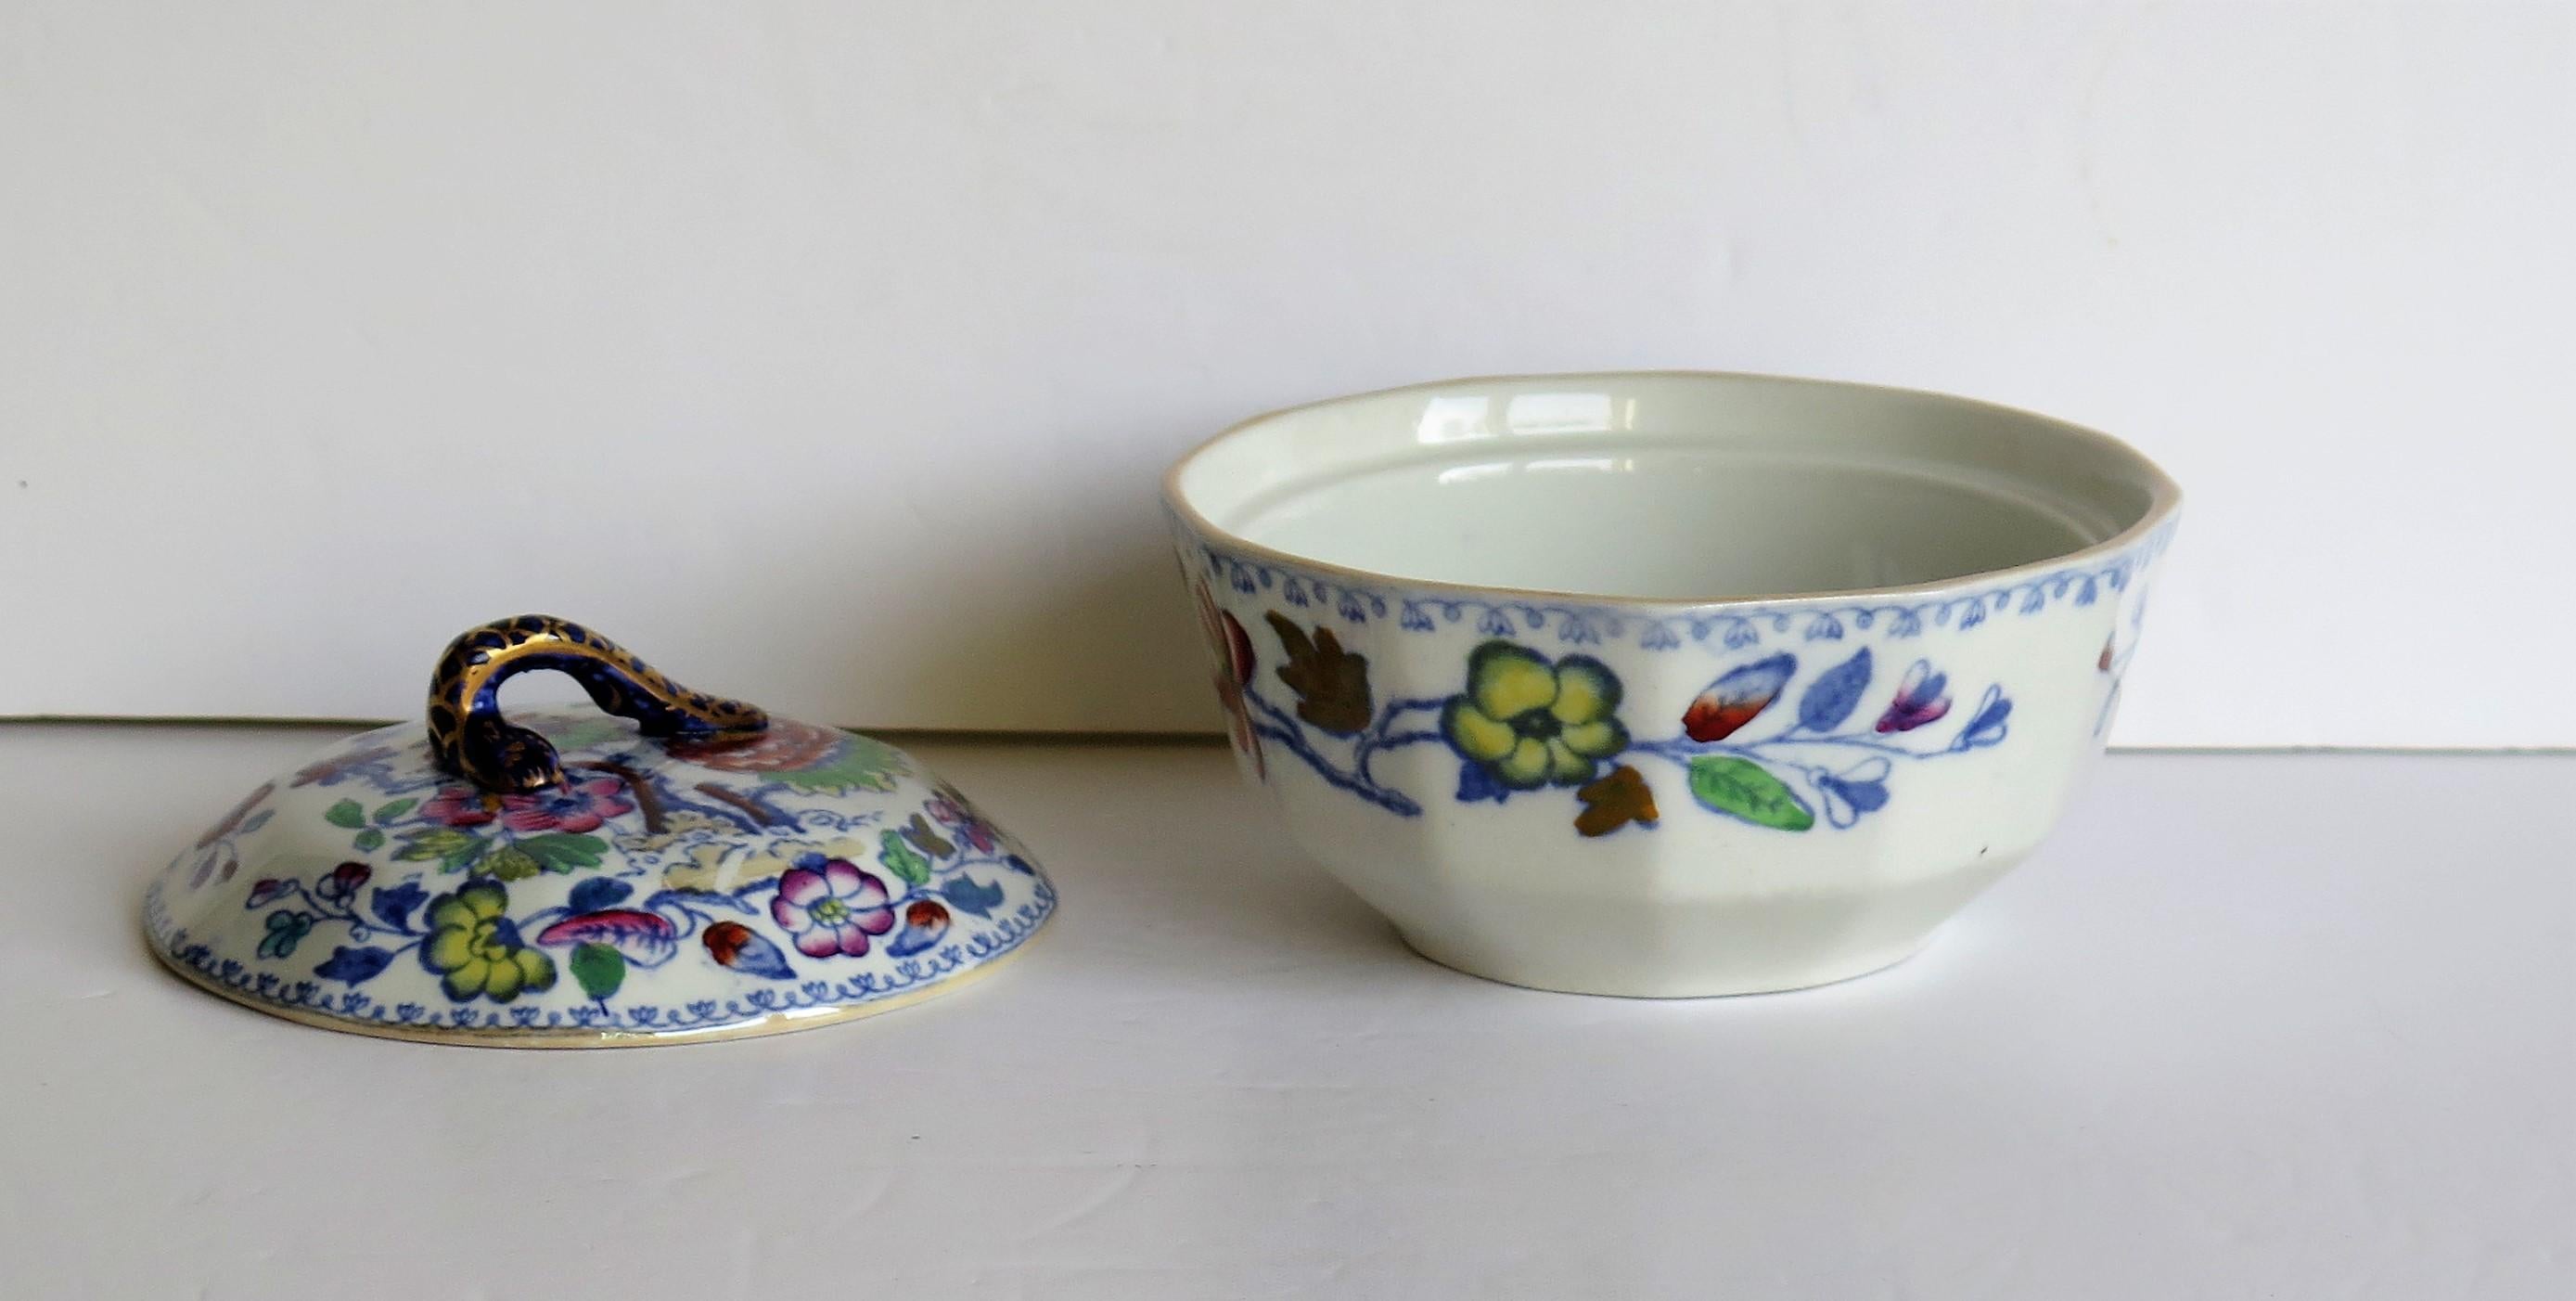 Mason's Ironstone Lidded Dish or Bowl in Flying Bird Pattern, circa 1890 For Sale 1